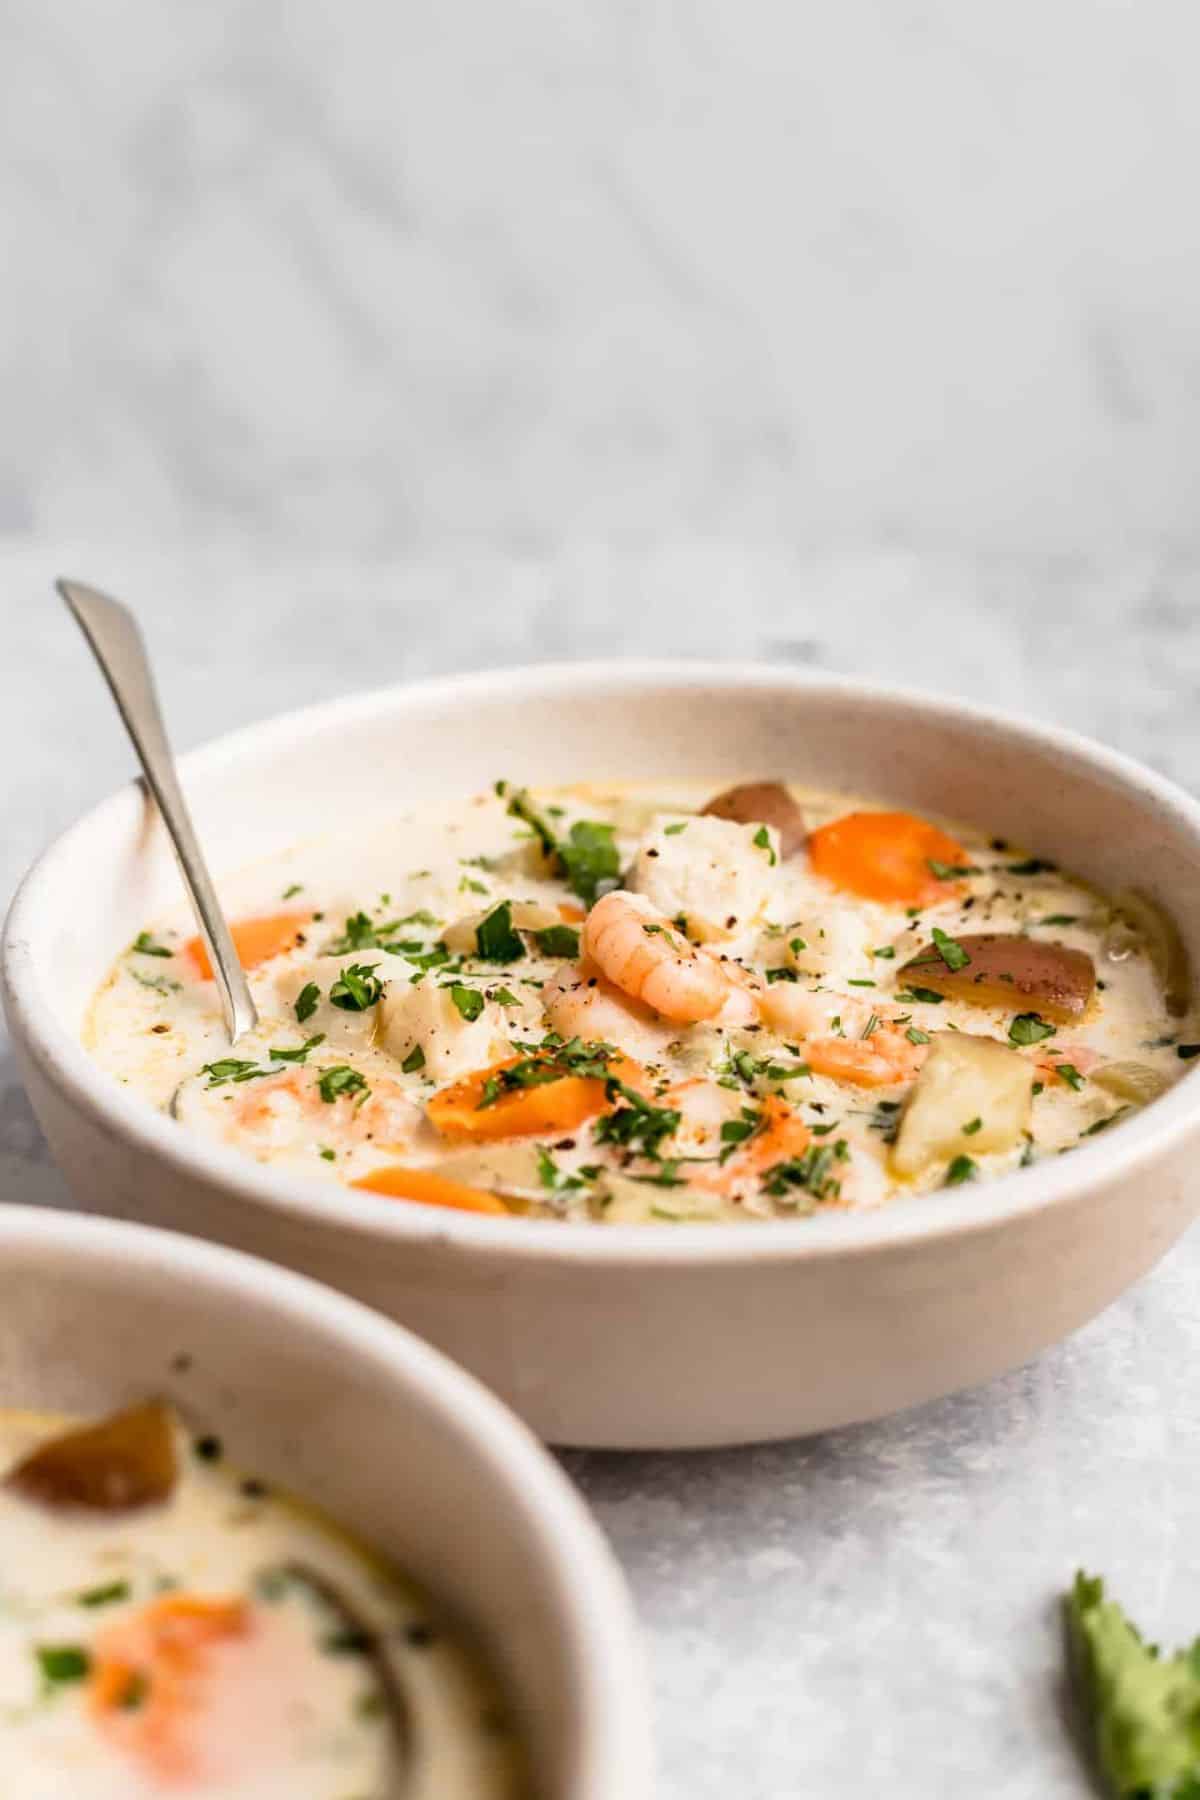 Seafood chowder with shrimp, fish, potatoes and carrots in a white bowl with a spoon.